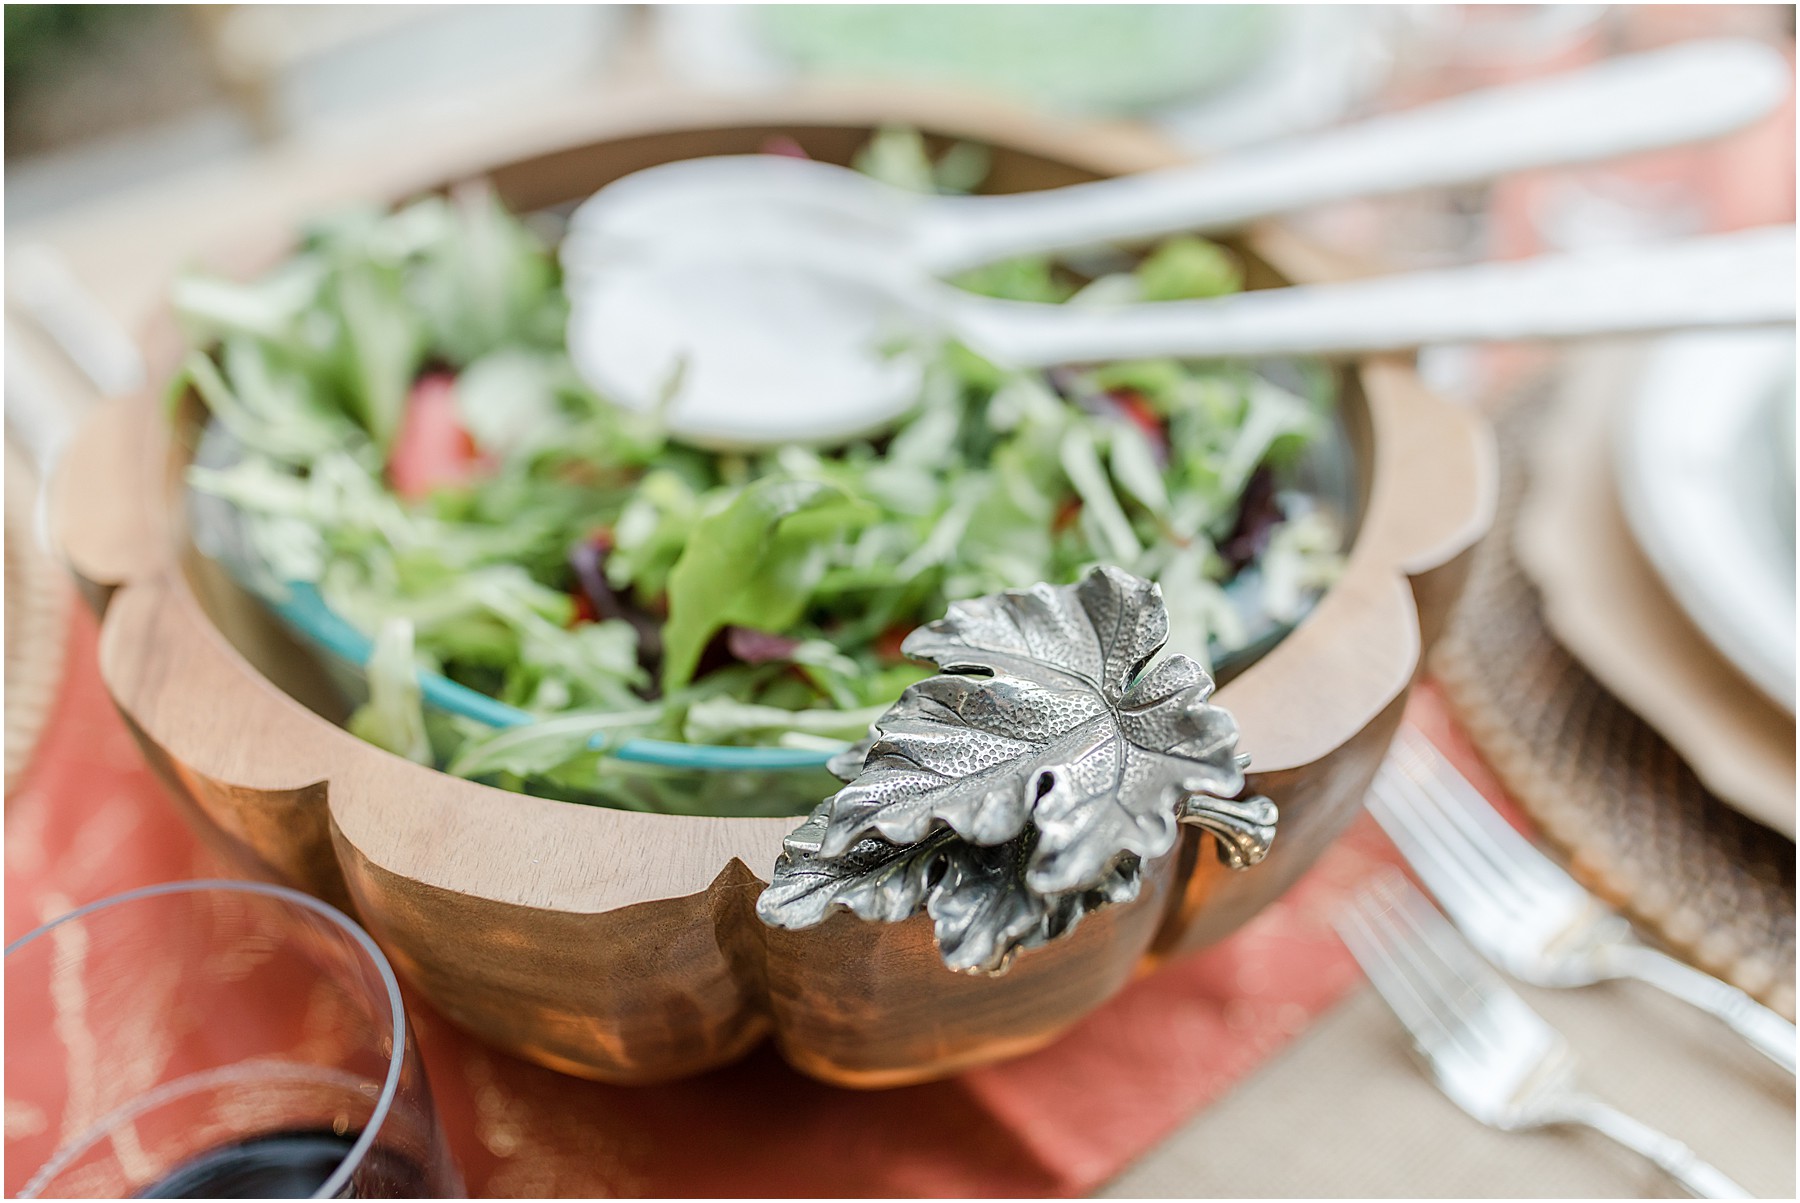 Close up of a serving salad bown that is wooden with a metal leaf embellishment.